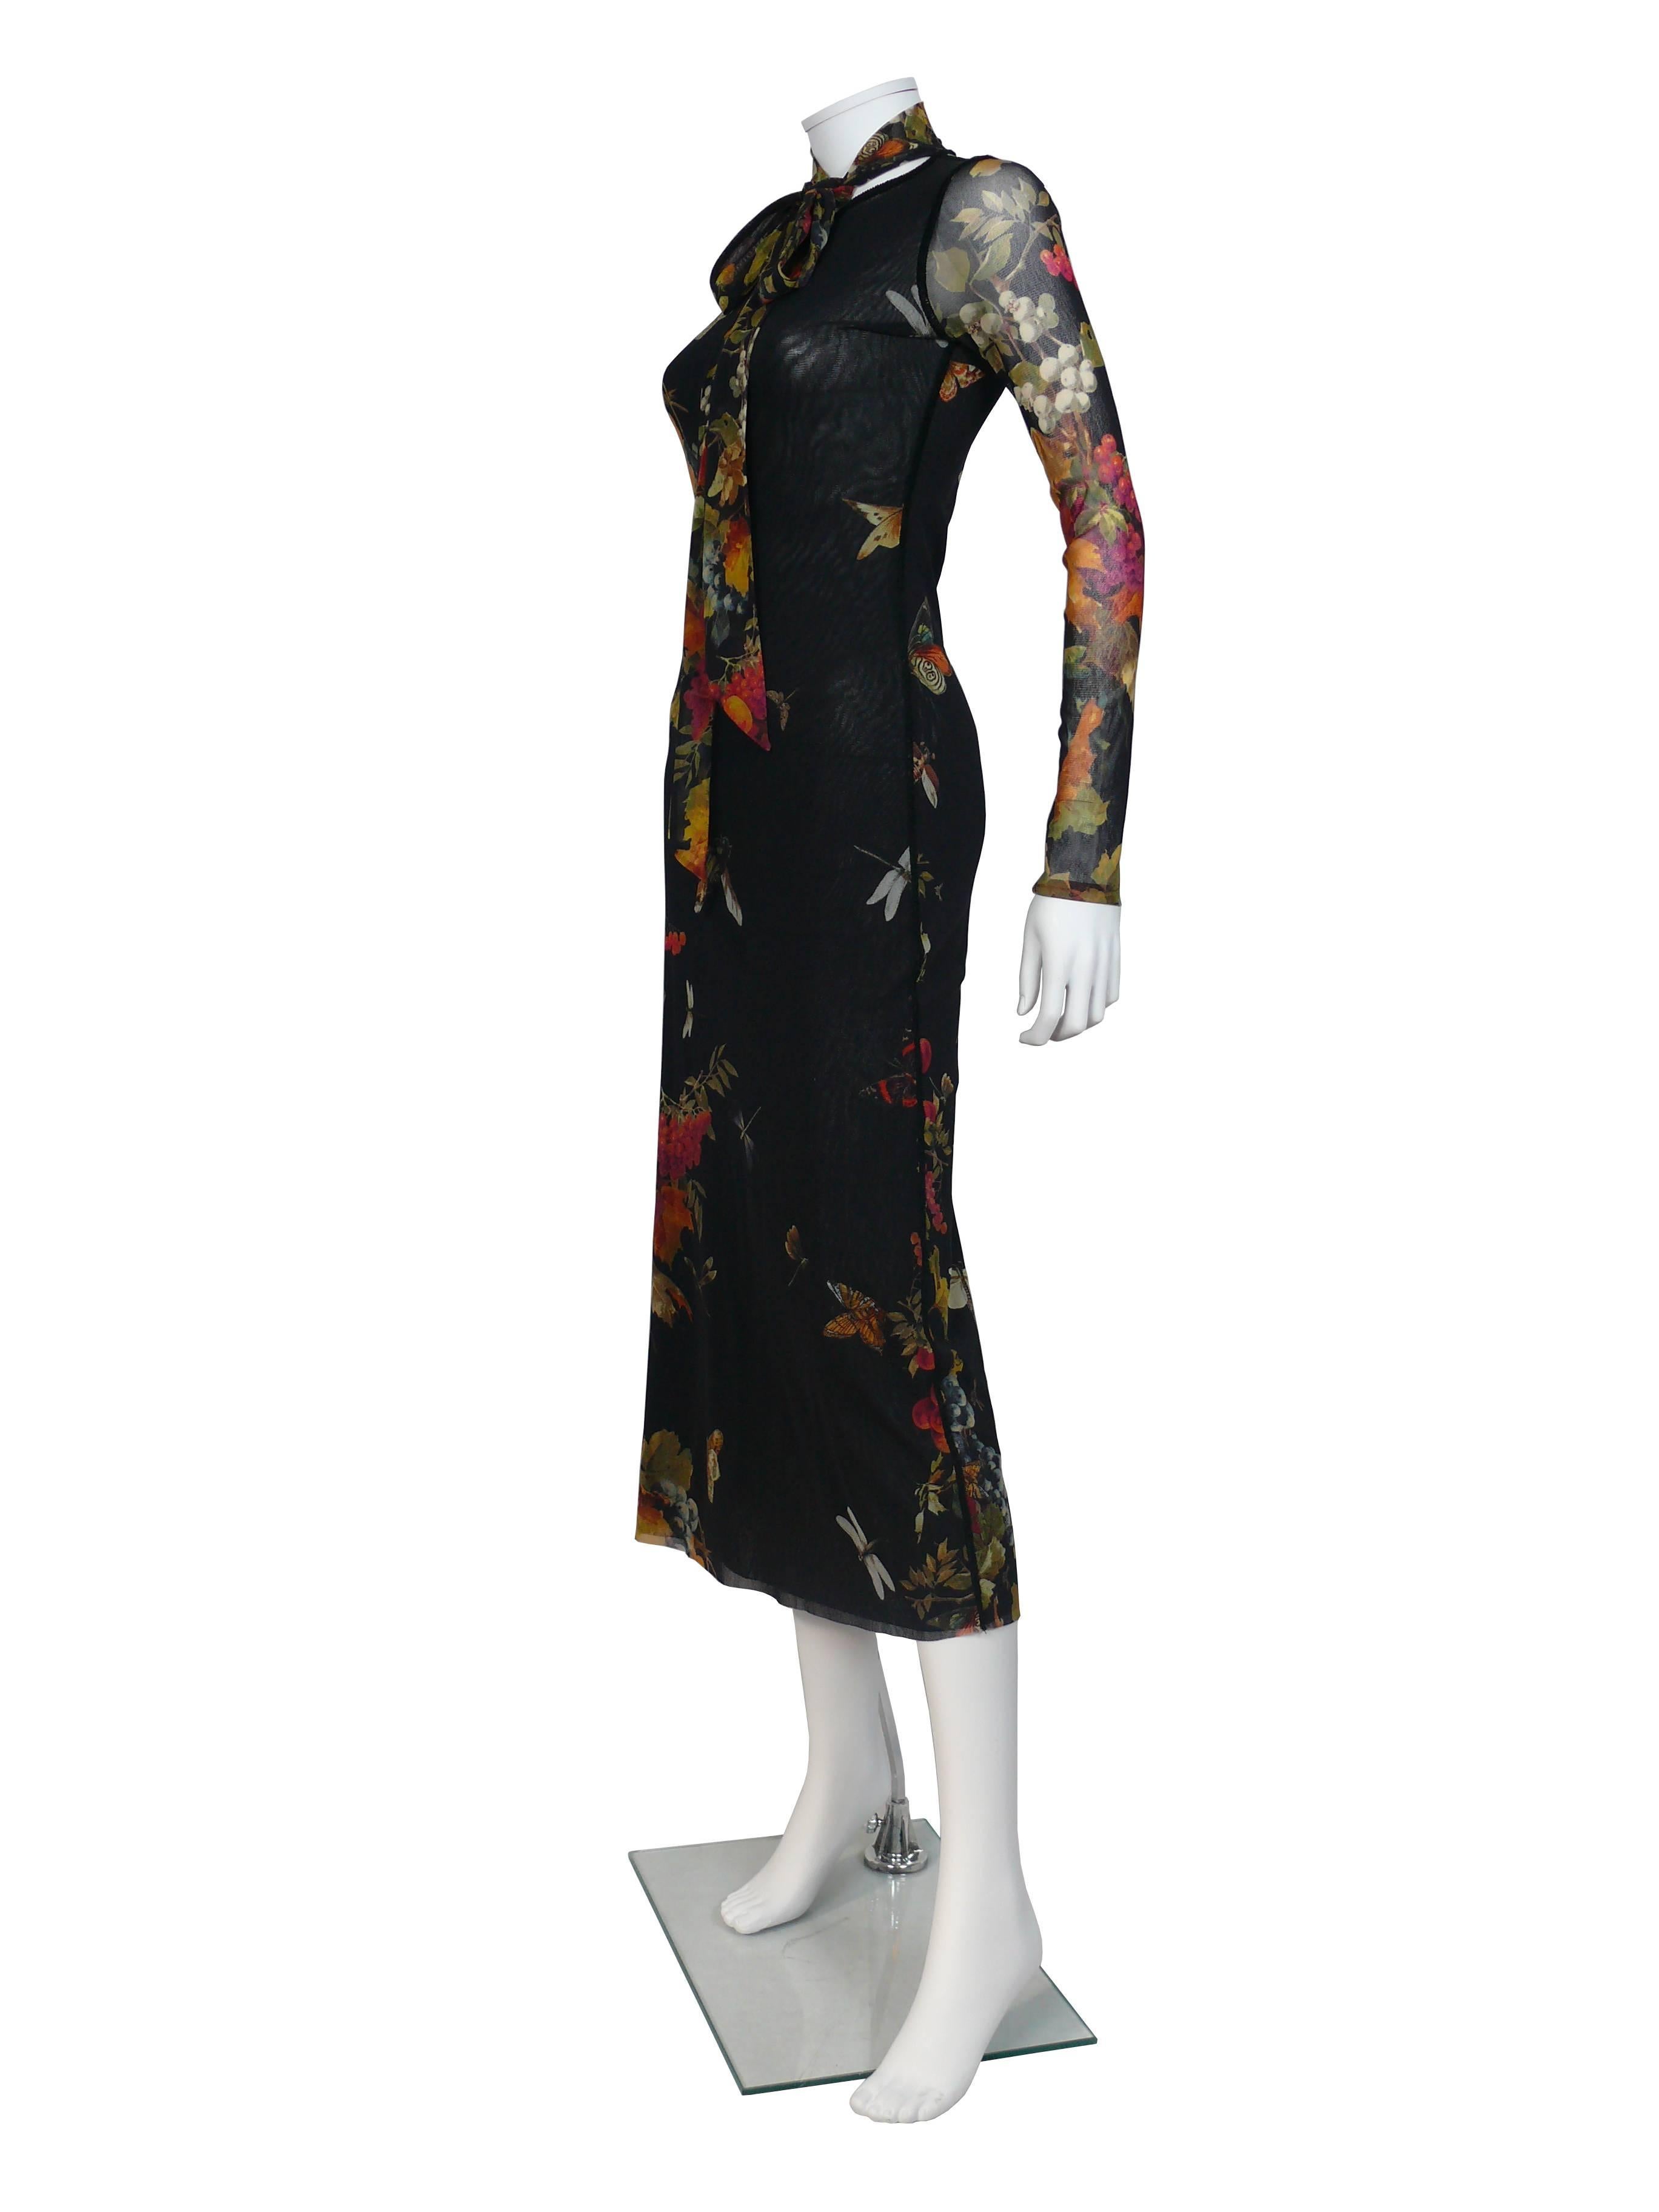 JEAN PAUL GAULTIER gorgeous floral print Fuzzi stretch mesh dress.

Multicolor design featuring grapes, butterflies and dragonflies on a black background.

Label reads JEAN PAUL GAULTIER Soleil.

Marked Size : M.
Please refer to